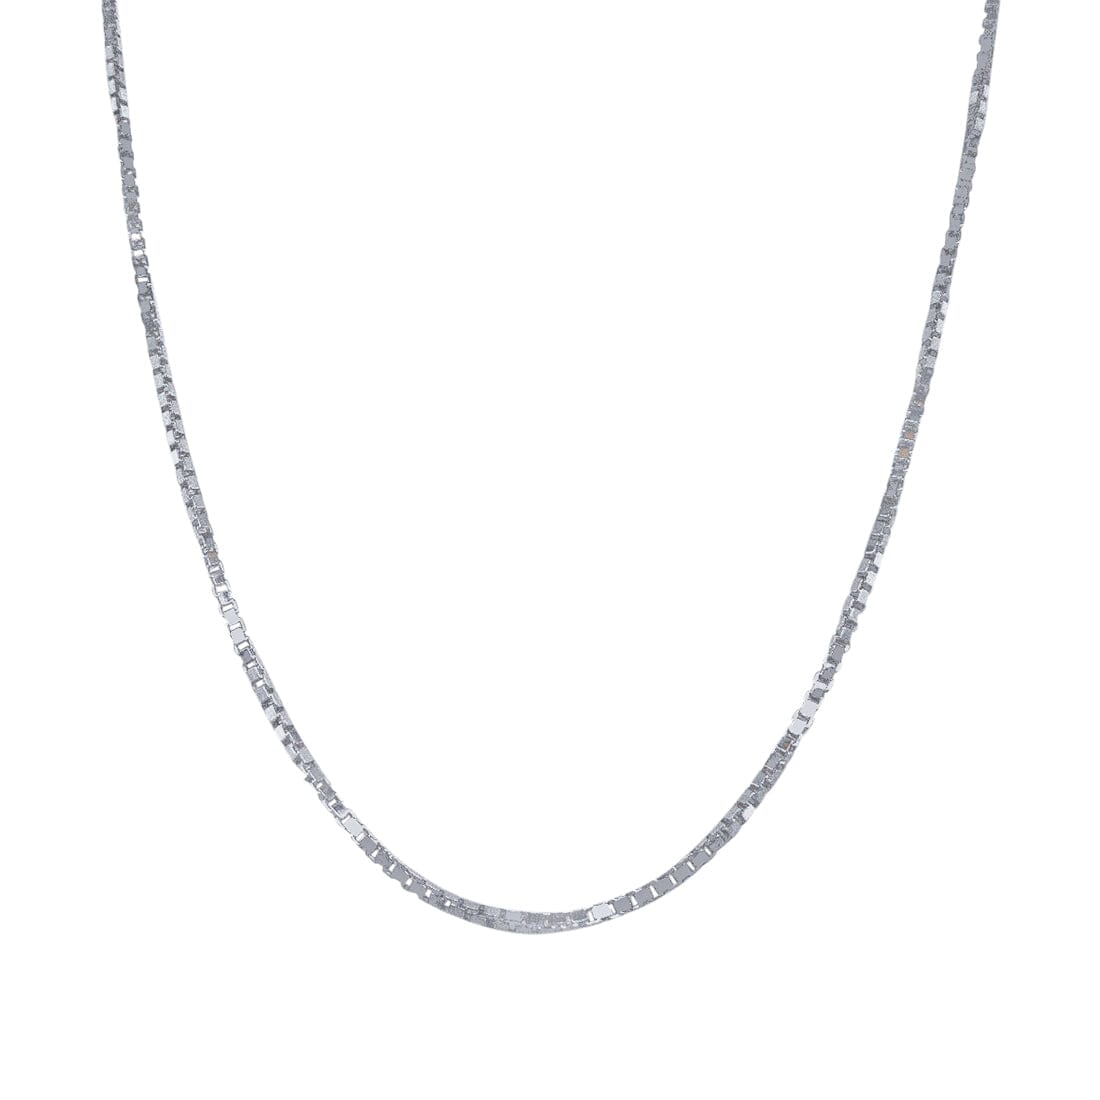 45cm Box Chain Necklace in Sterling Silver Necklaces Bevilles 